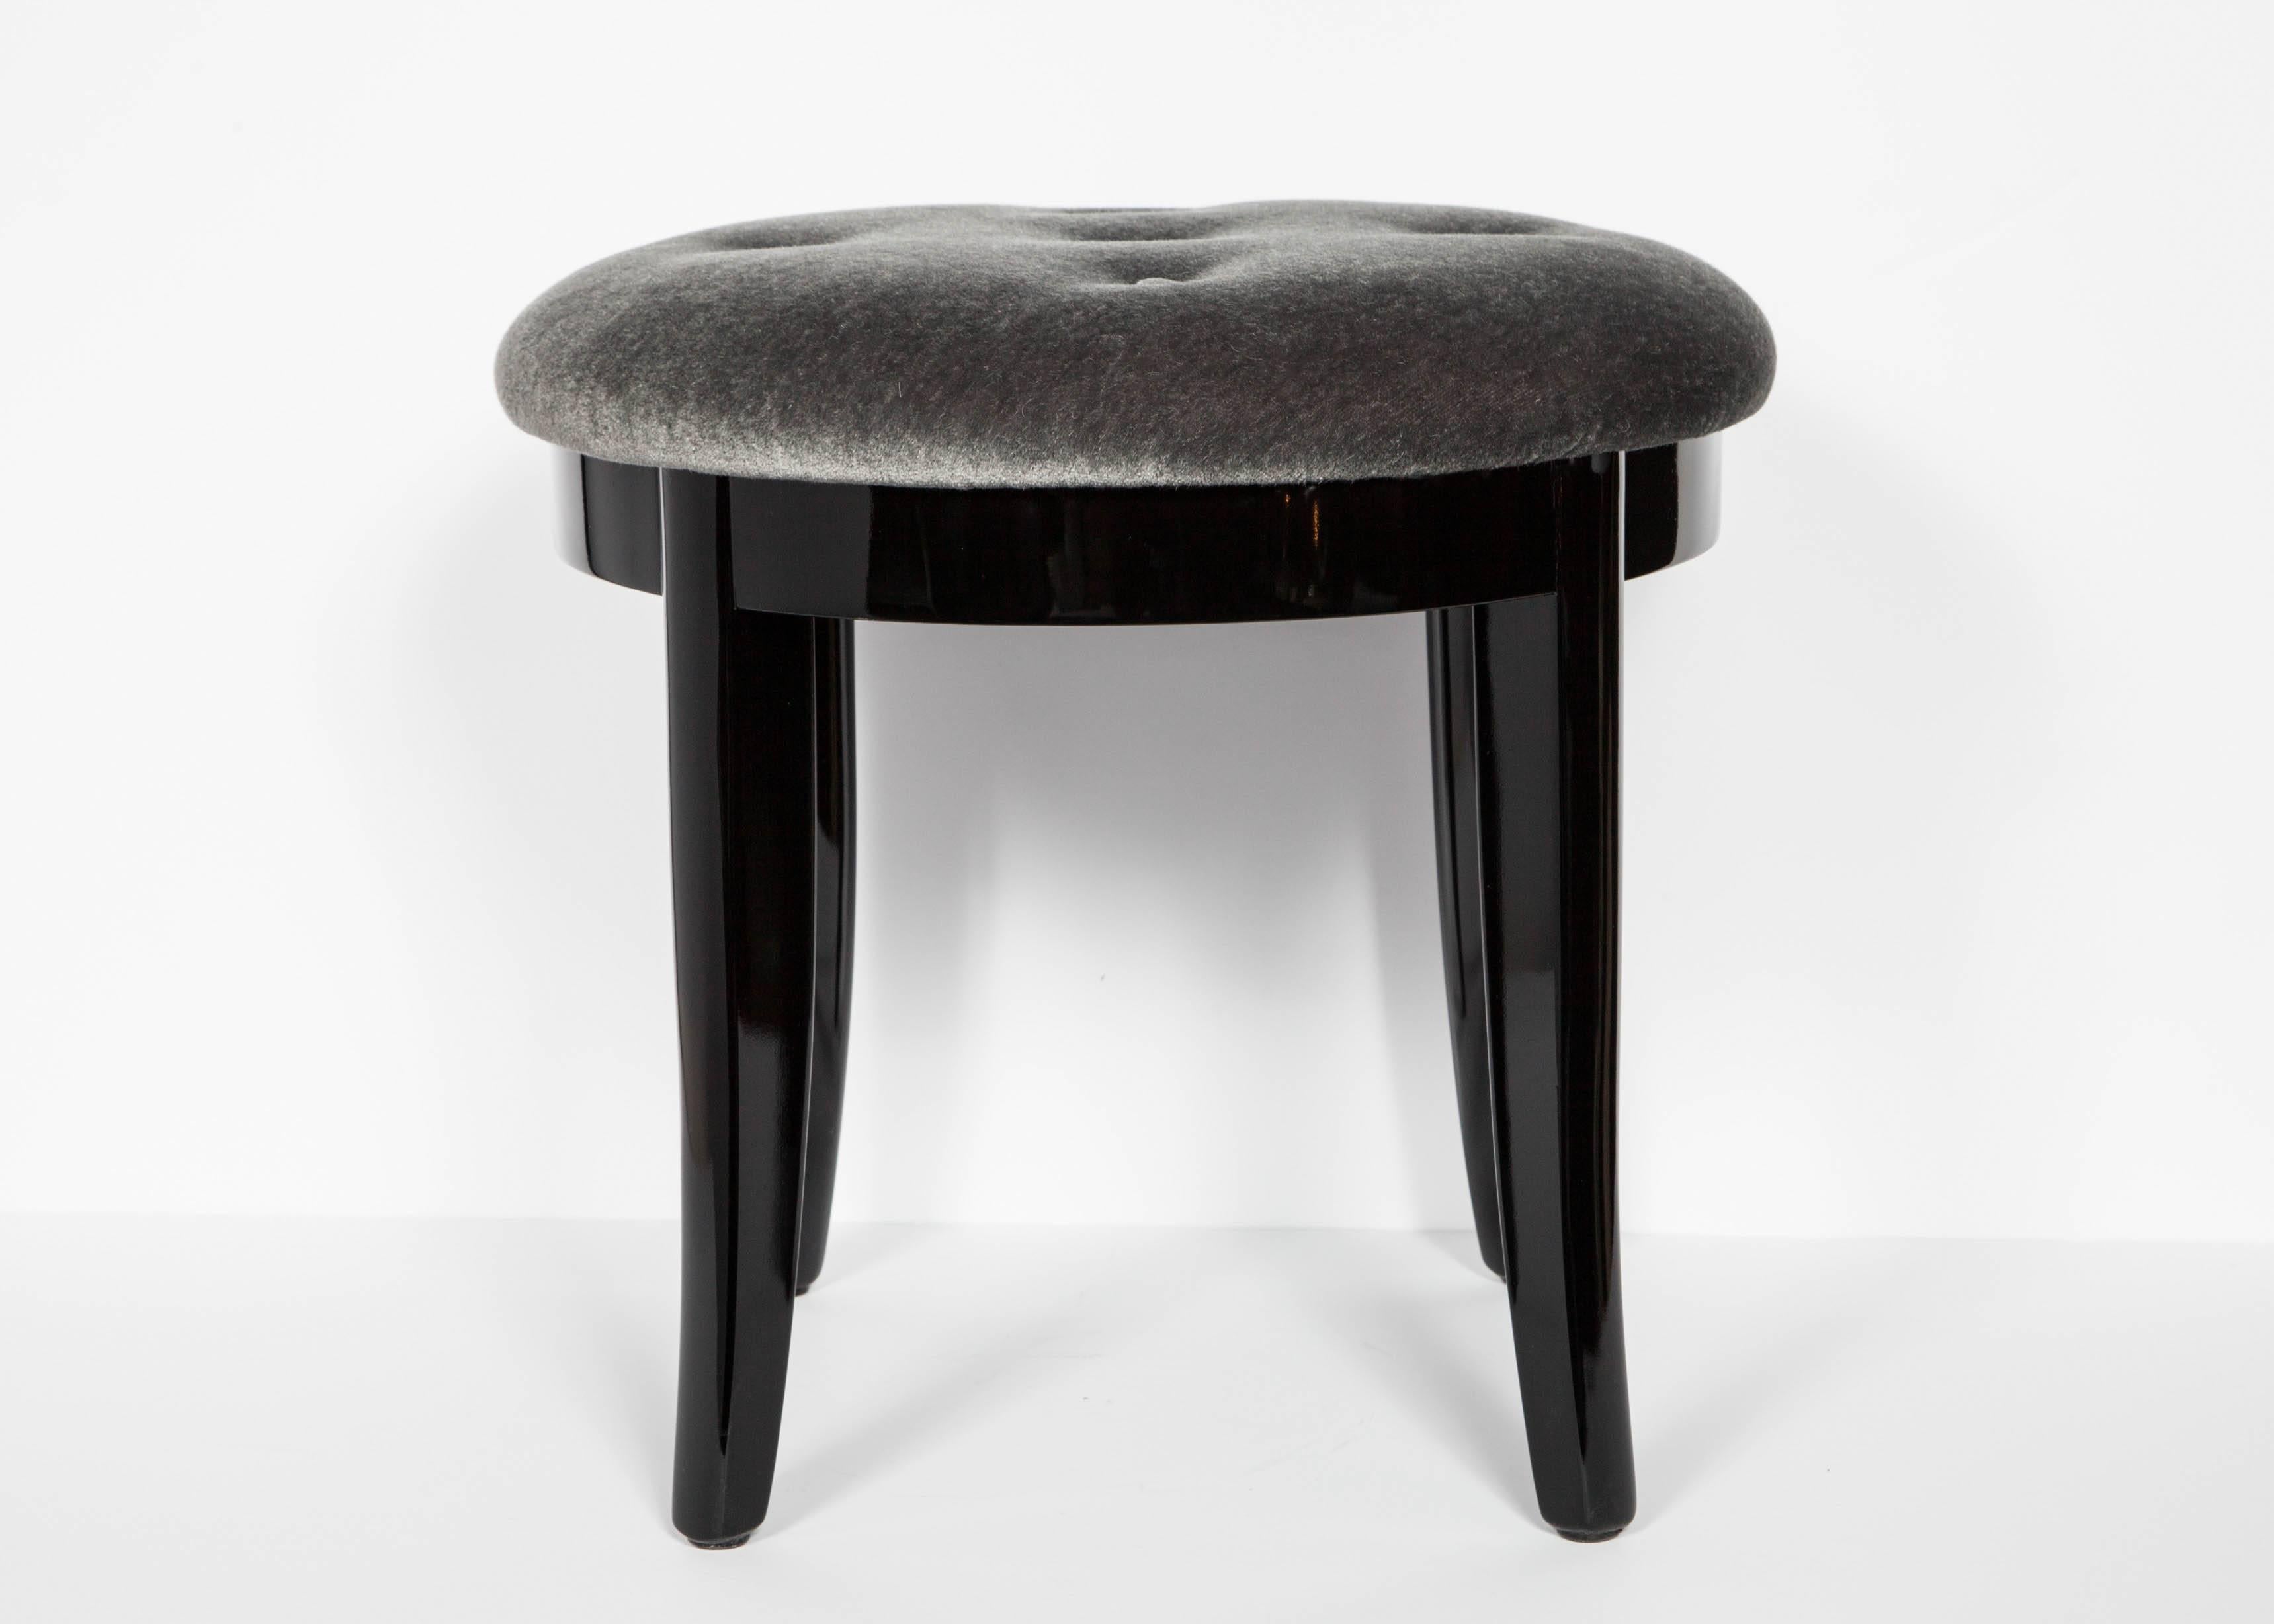 American Elegant Art Deco Vanity Stool in Black Lacquer and Grey Mohair